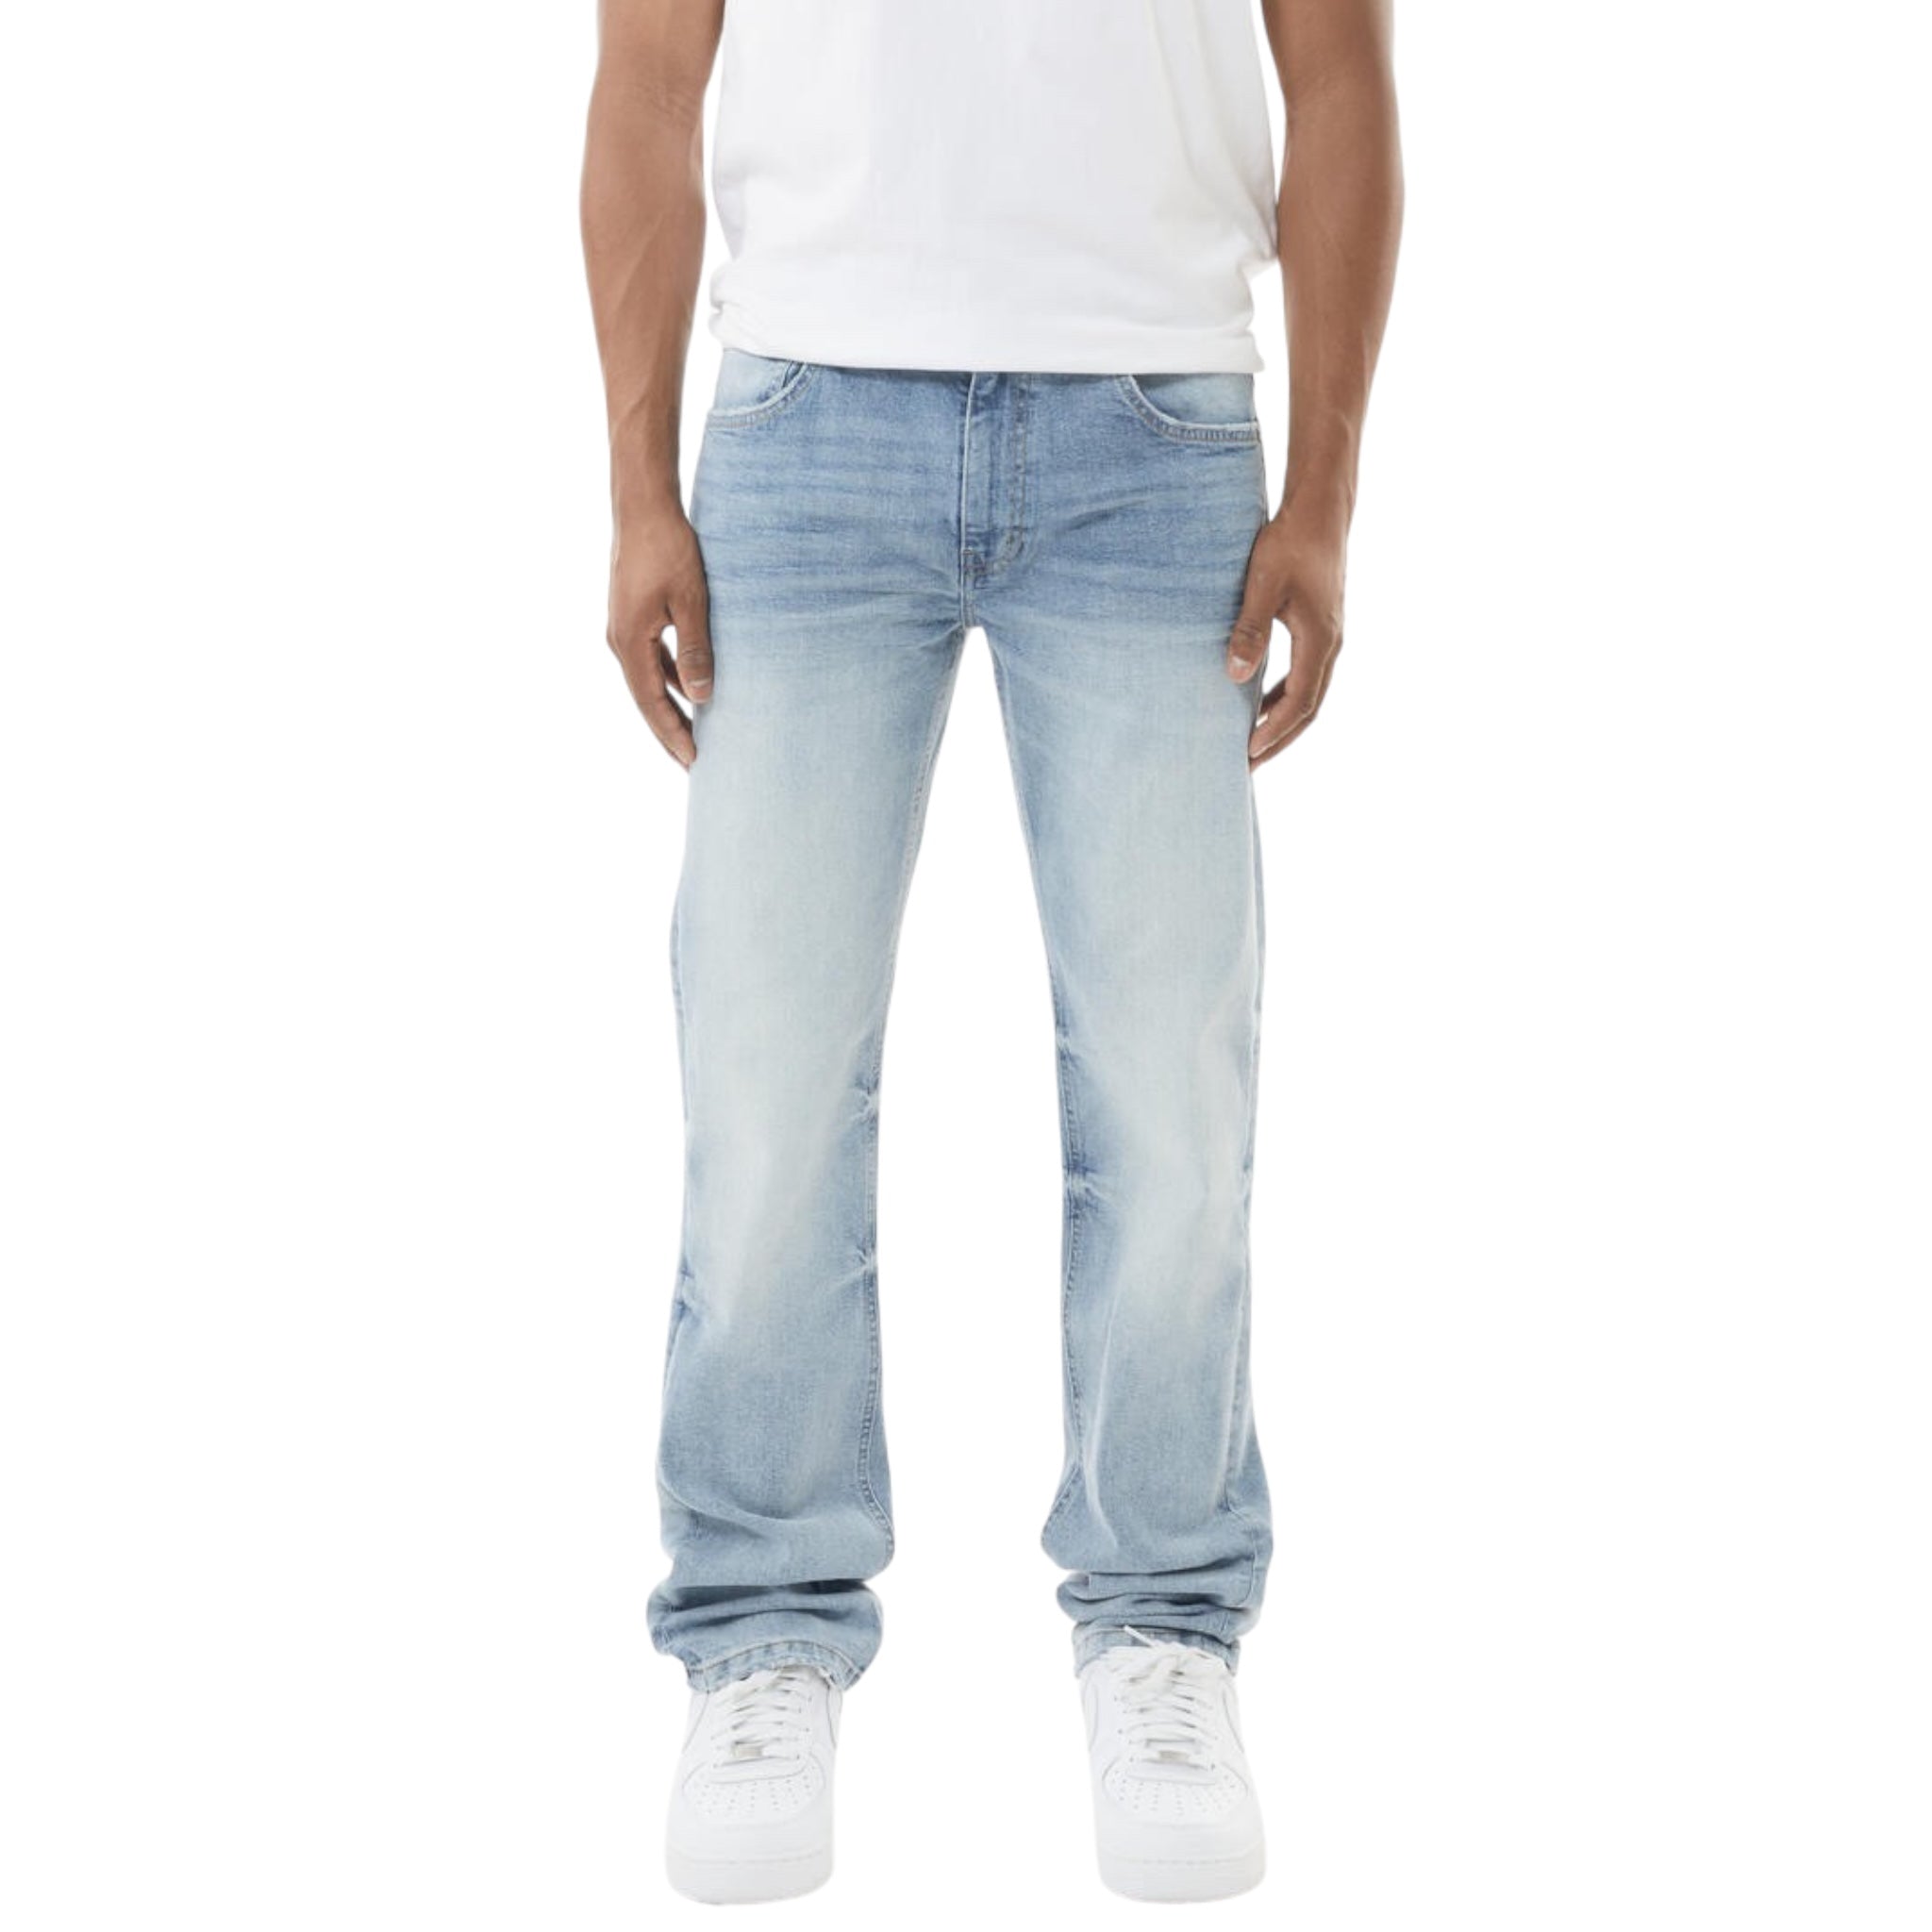 M. SOCIETY: Straight Fit Jeans MS-80285